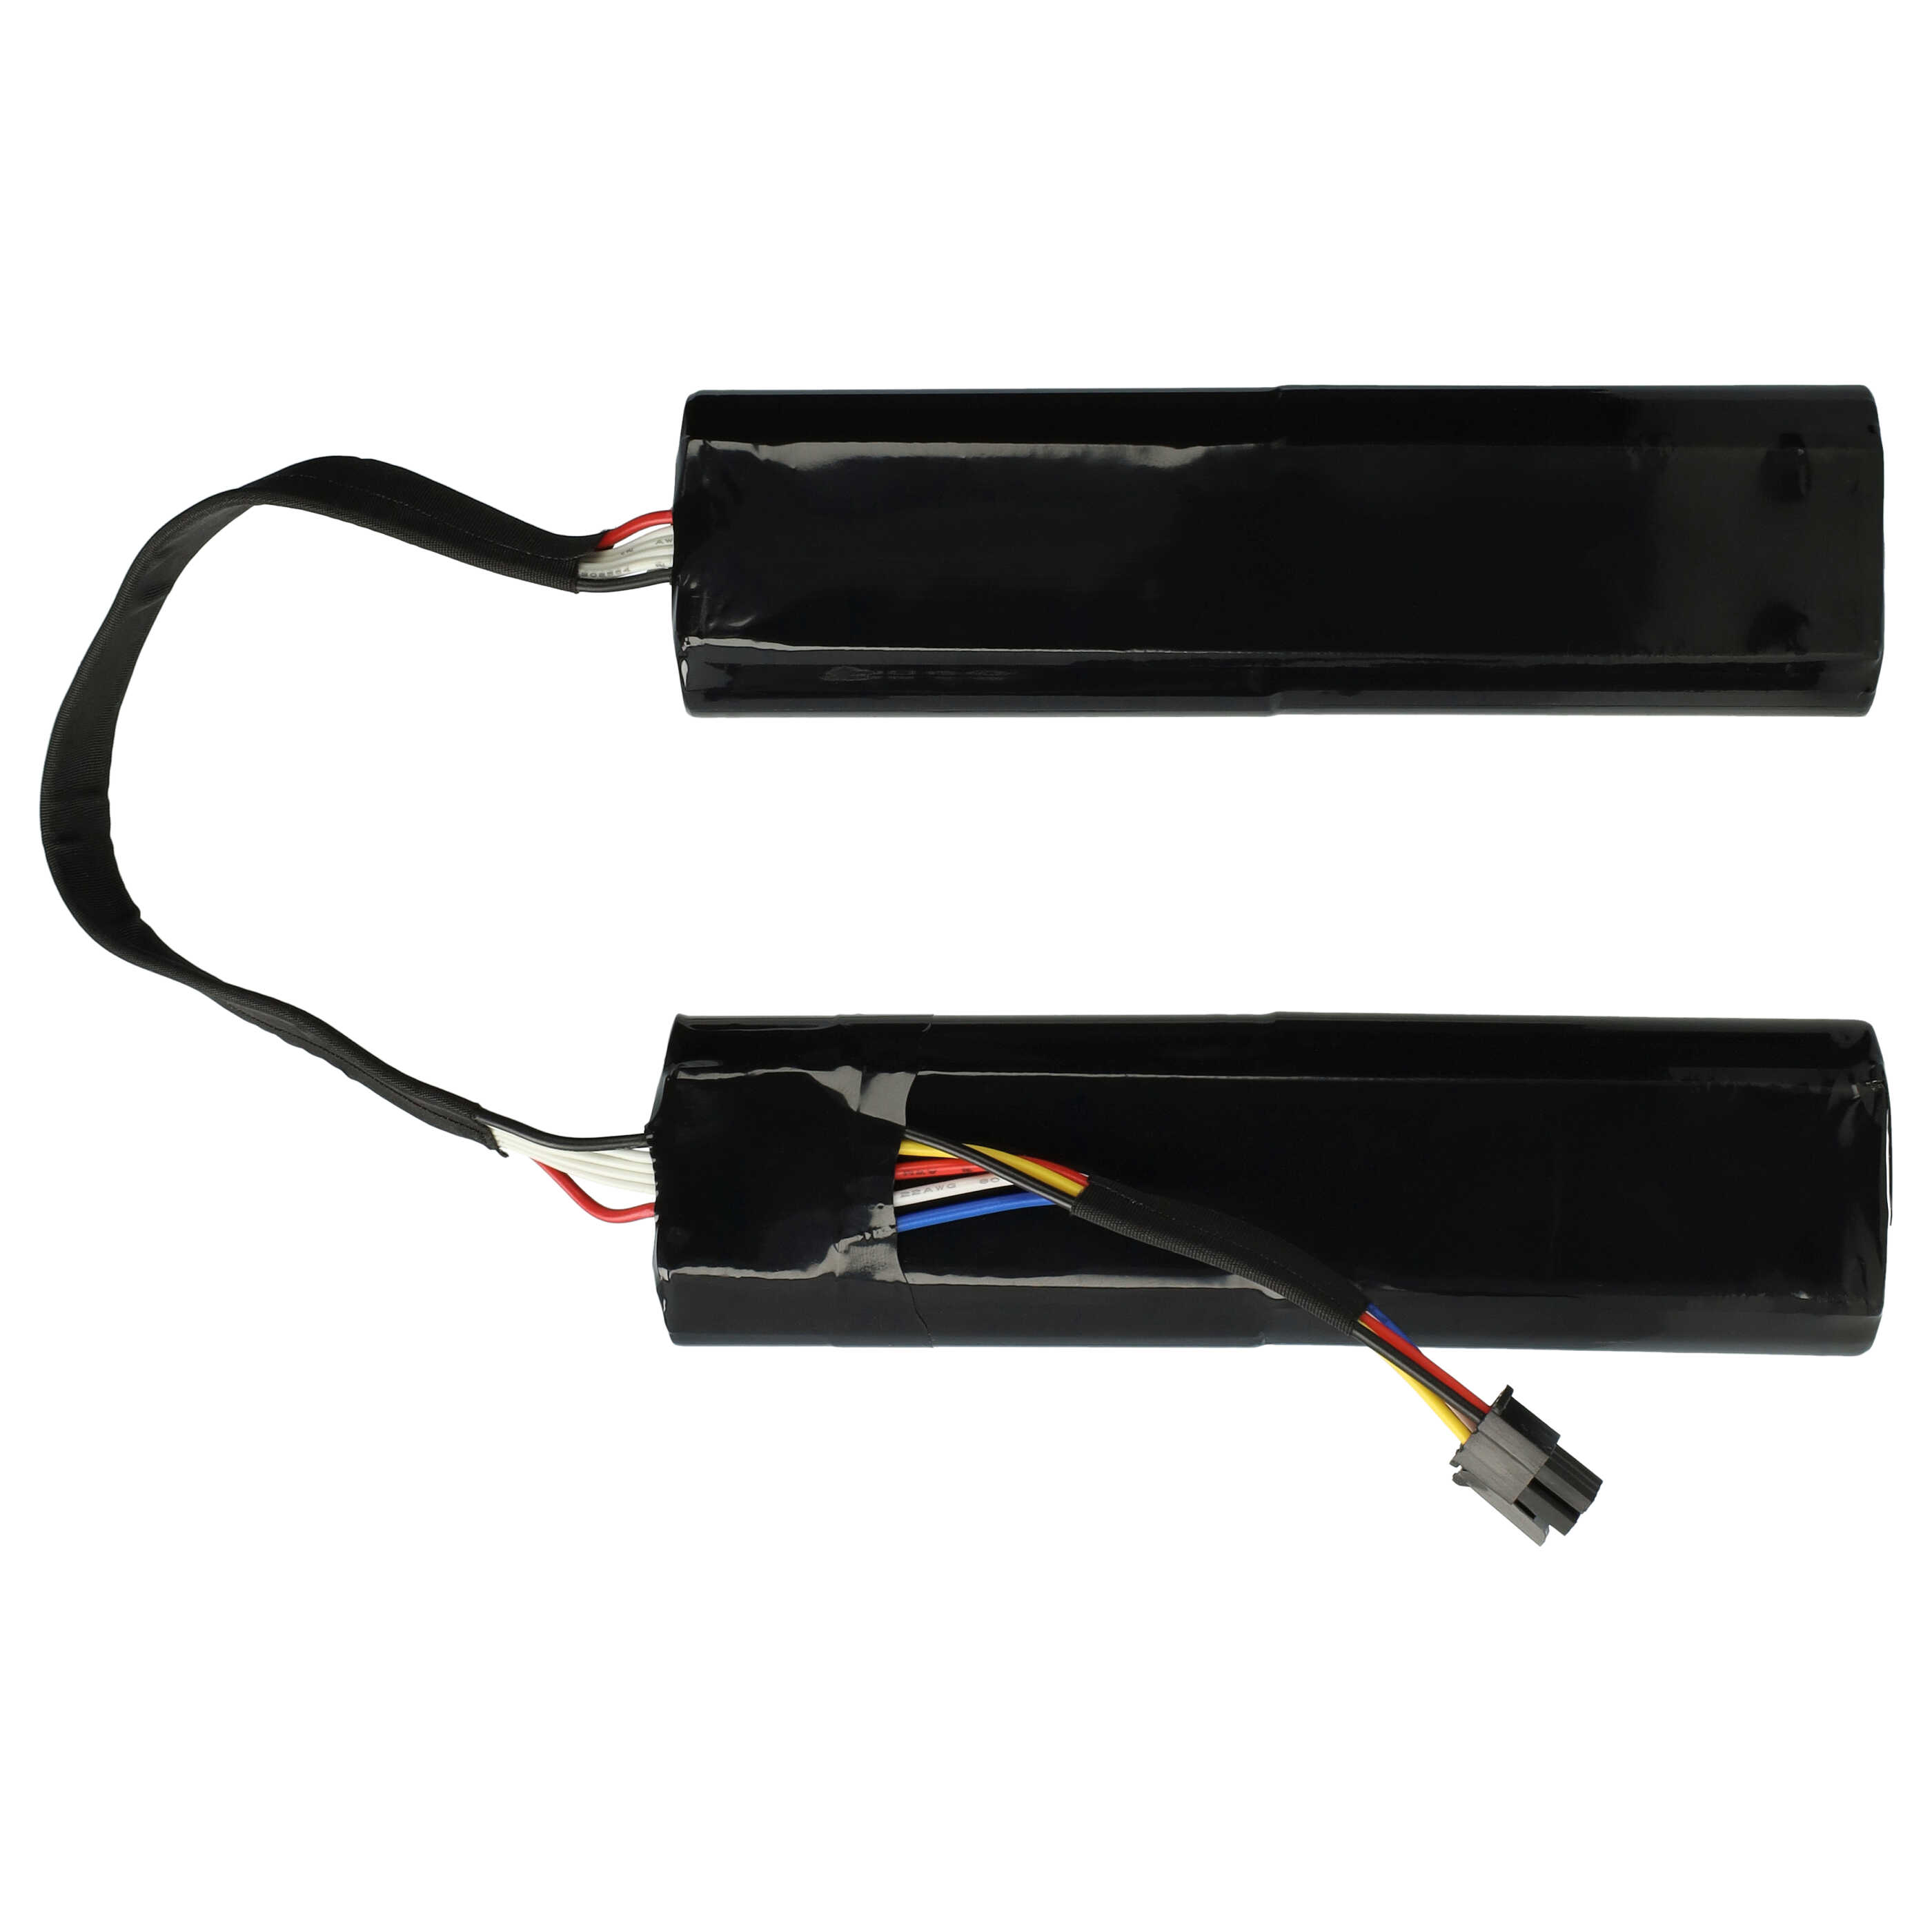 Battery Replacement for Xiaomi P2027-4S2P-MMBK for - 5200mAh, 14.4V, Li-Ion